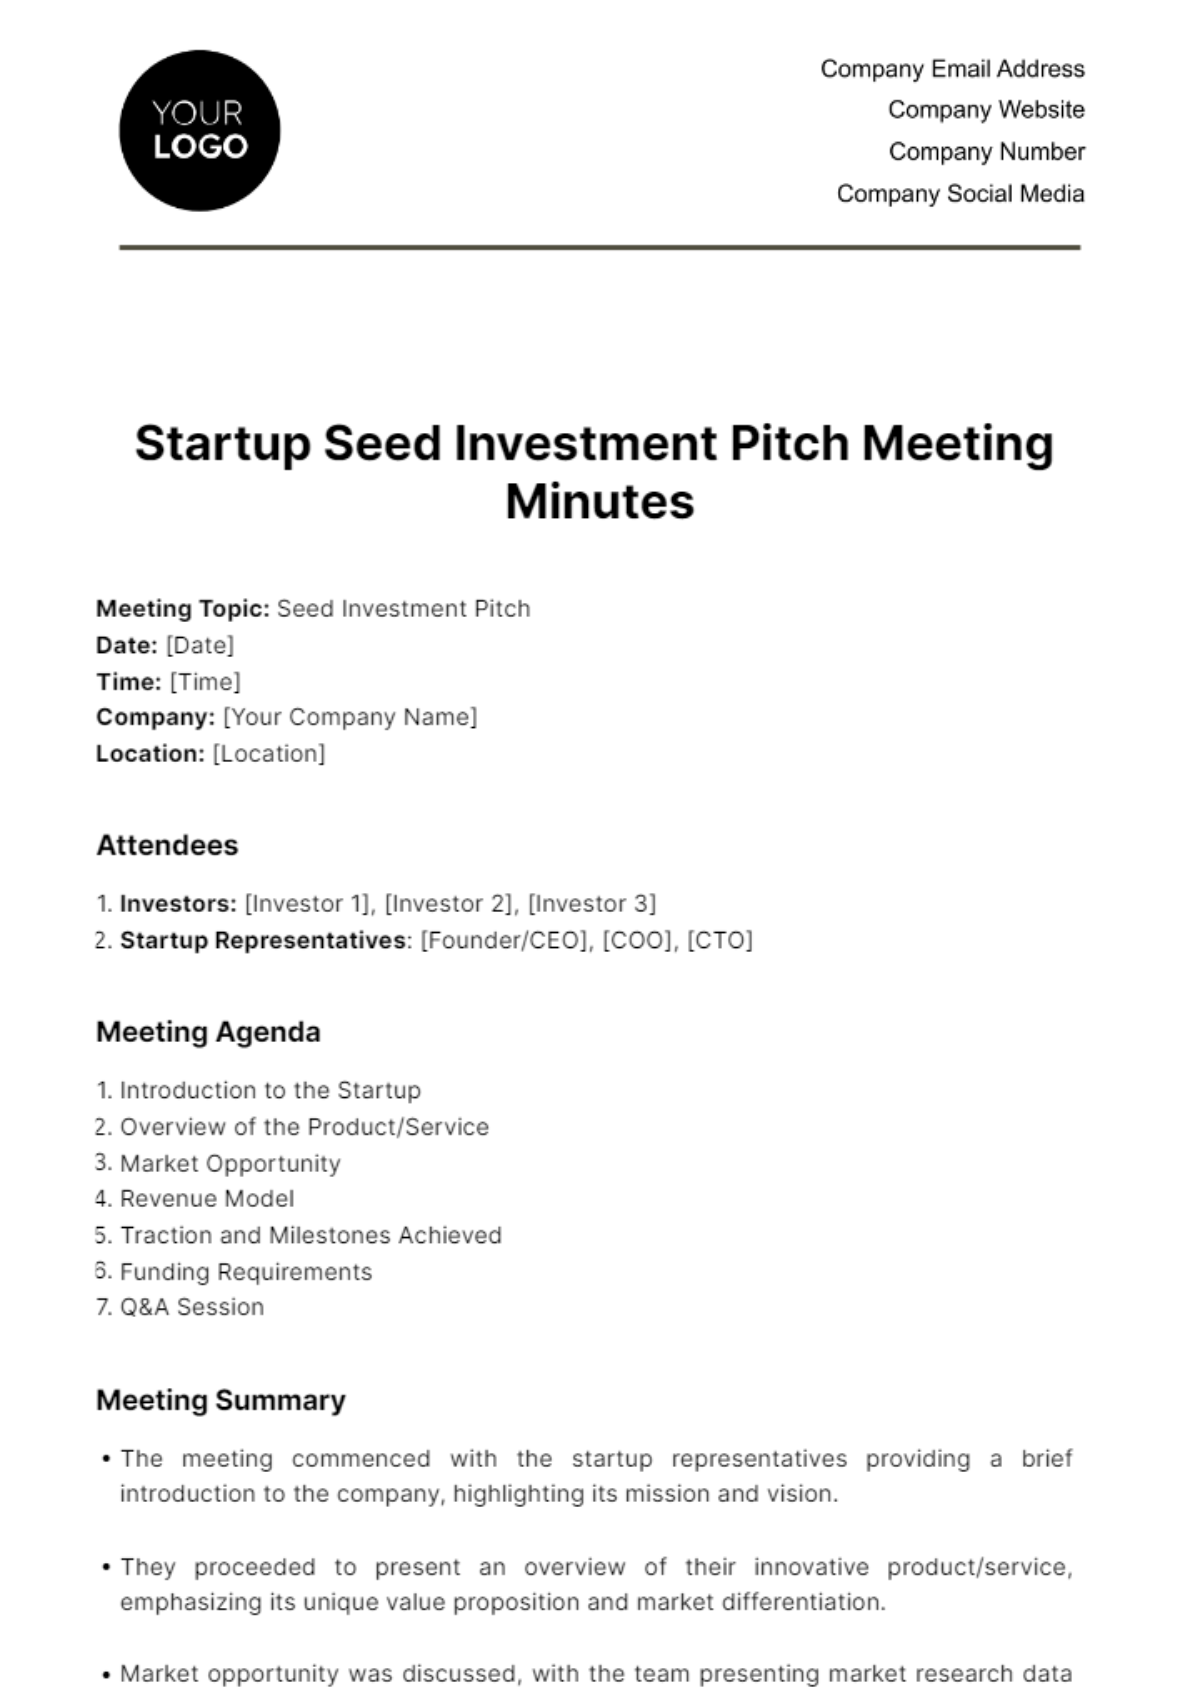 Startup Seed Investment Pitch Meeting Minute Template